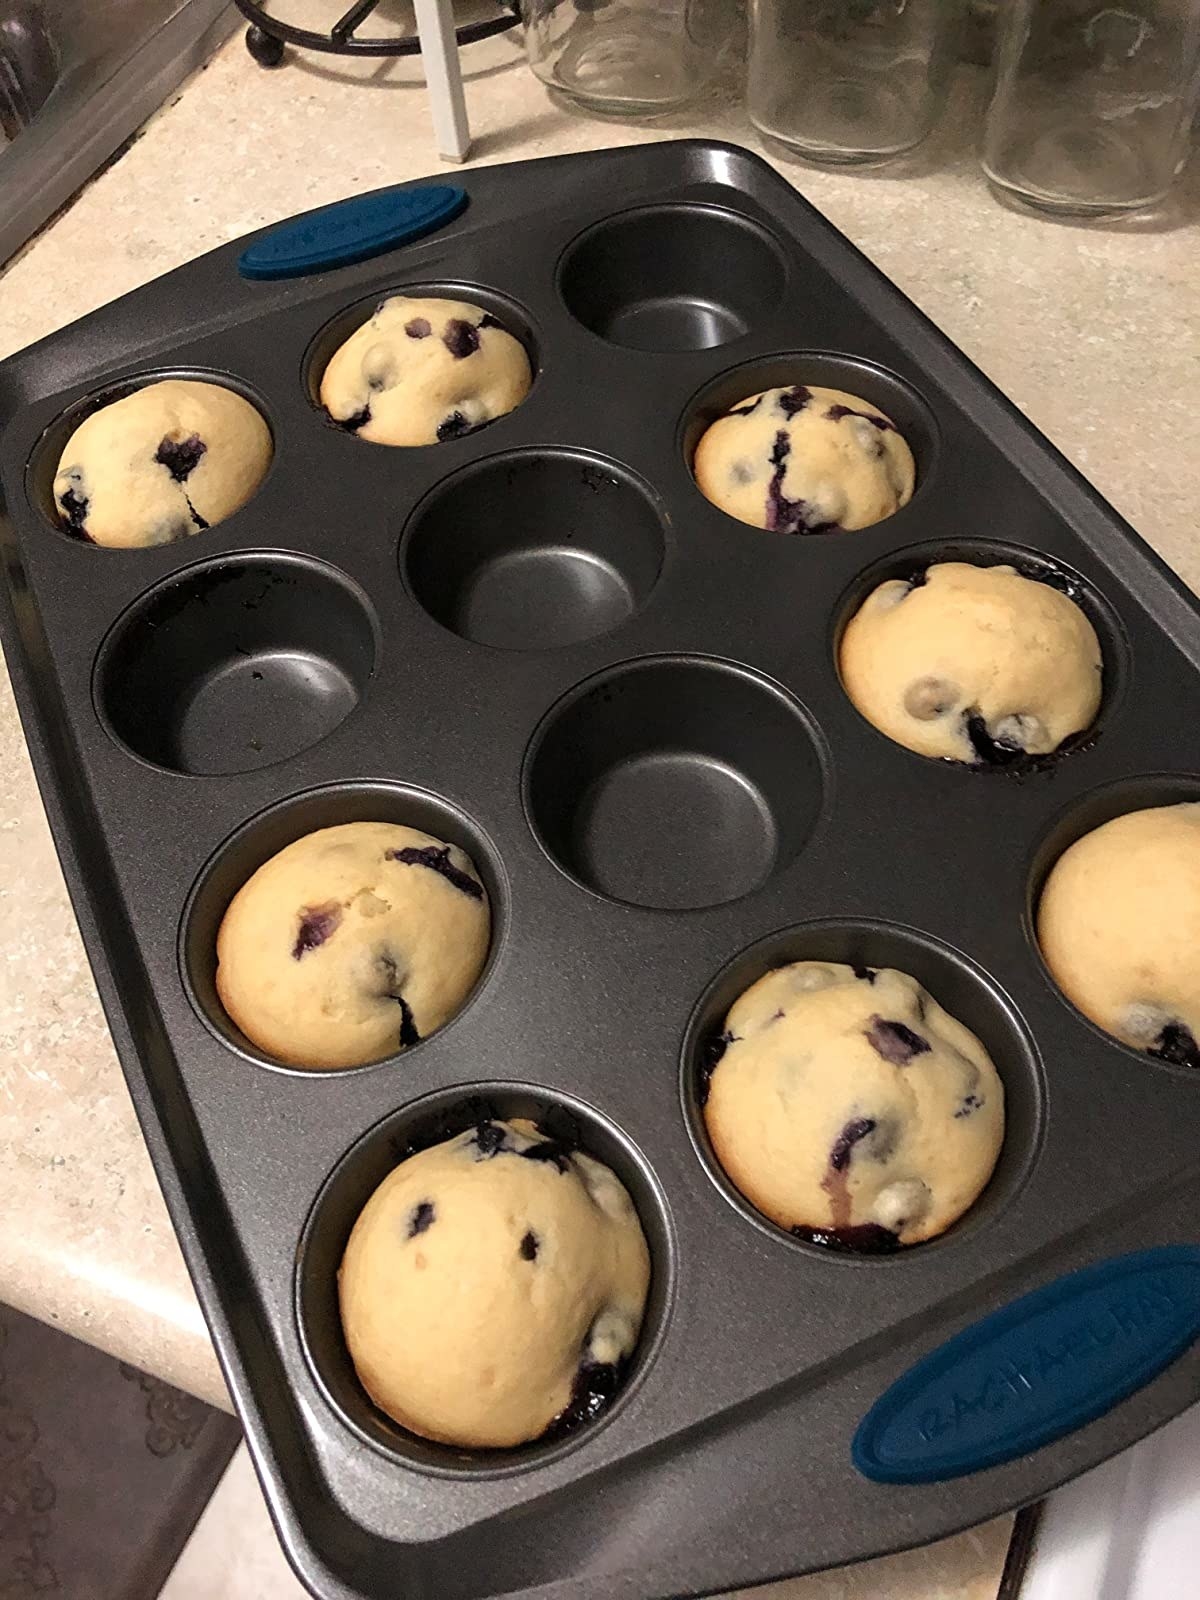 Reviewer image of muffins baked in pan